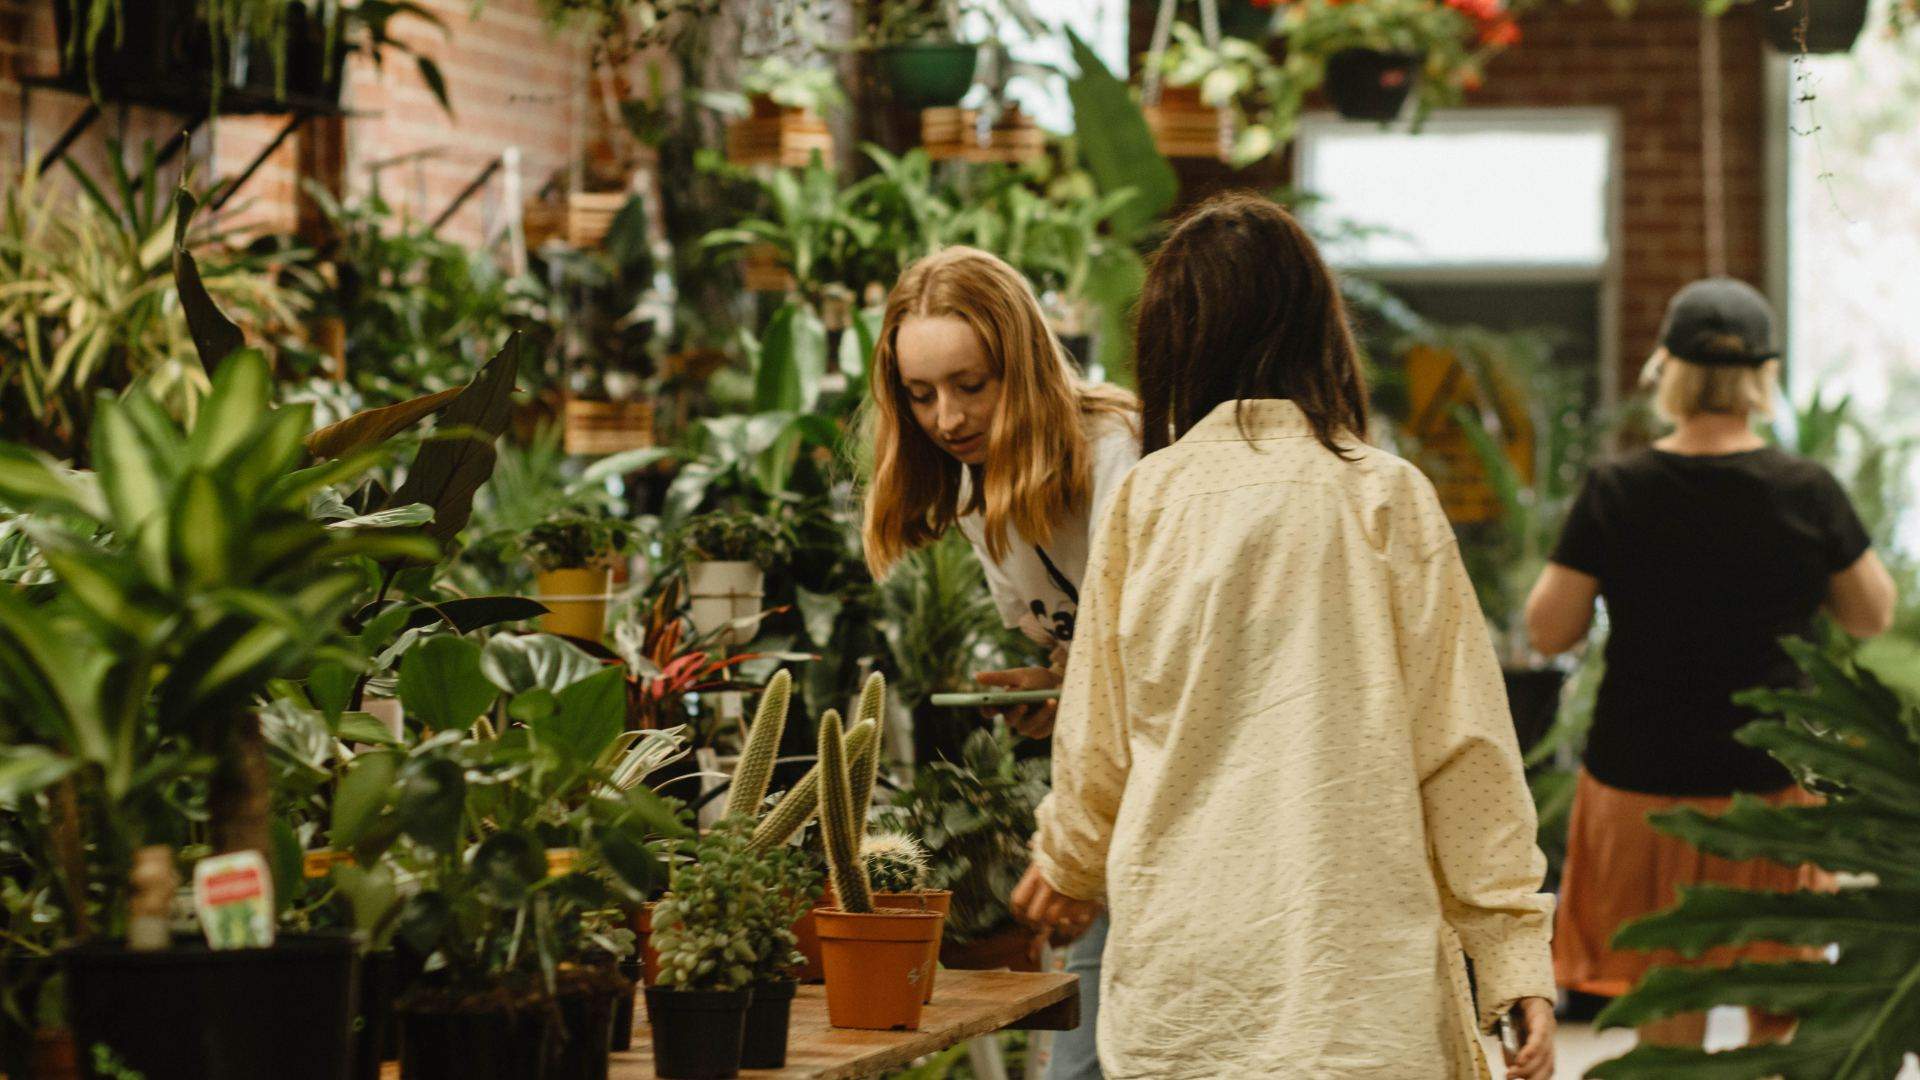 Botanicah Is Prahran's New Supersized Plant Warehouse Here to Fuel Your Houseplant Obsession